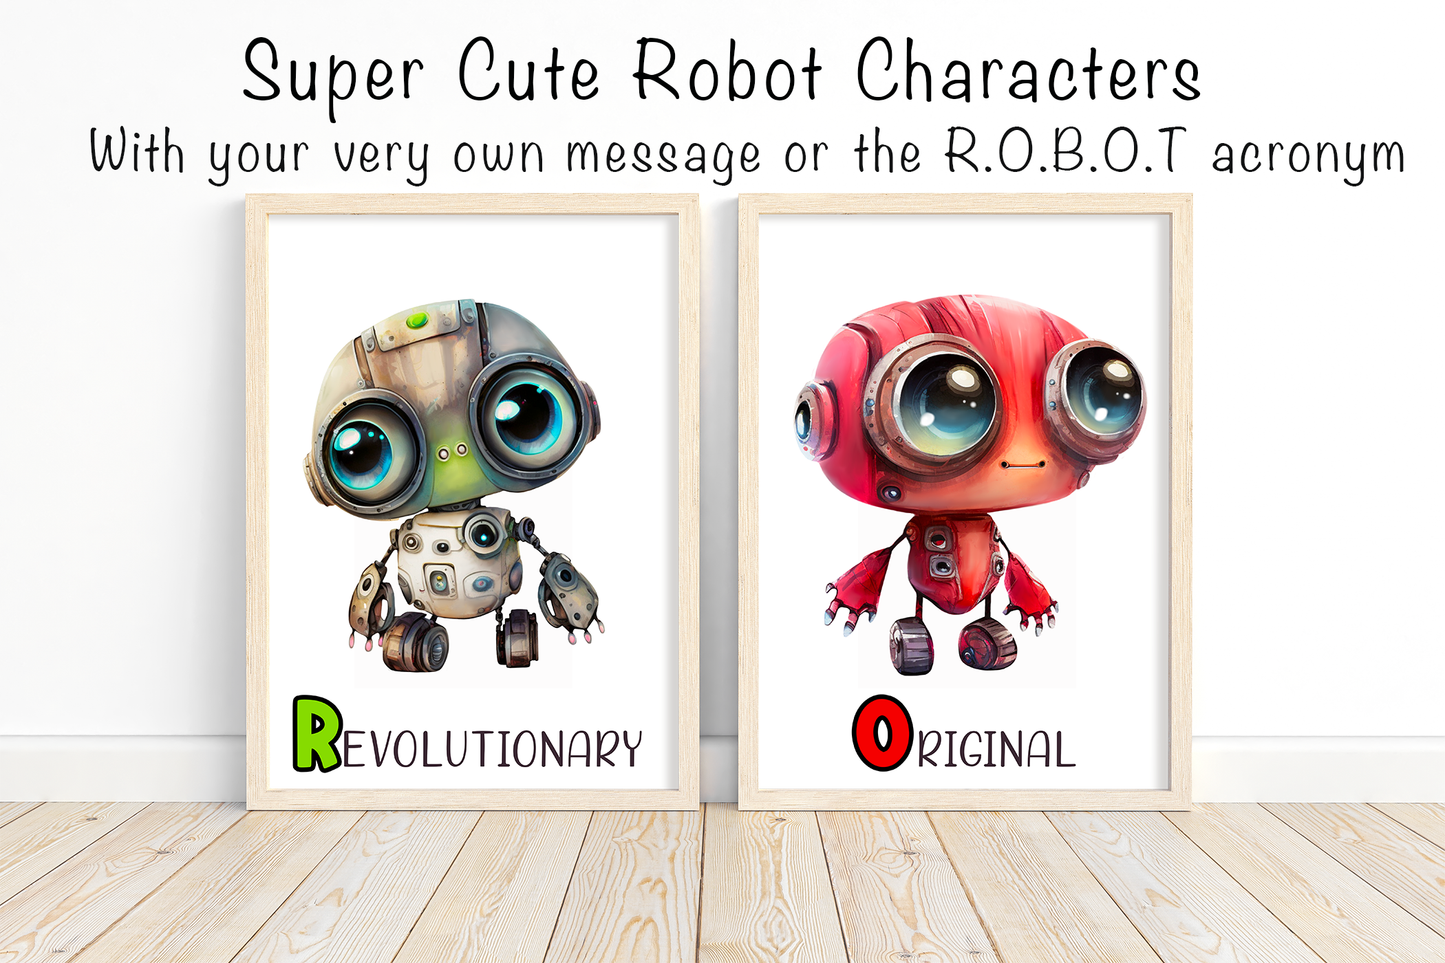 Adorable Bots Wall Art Collection - Infuse Playfulness with Cute Robot Decor in Bright Hues!